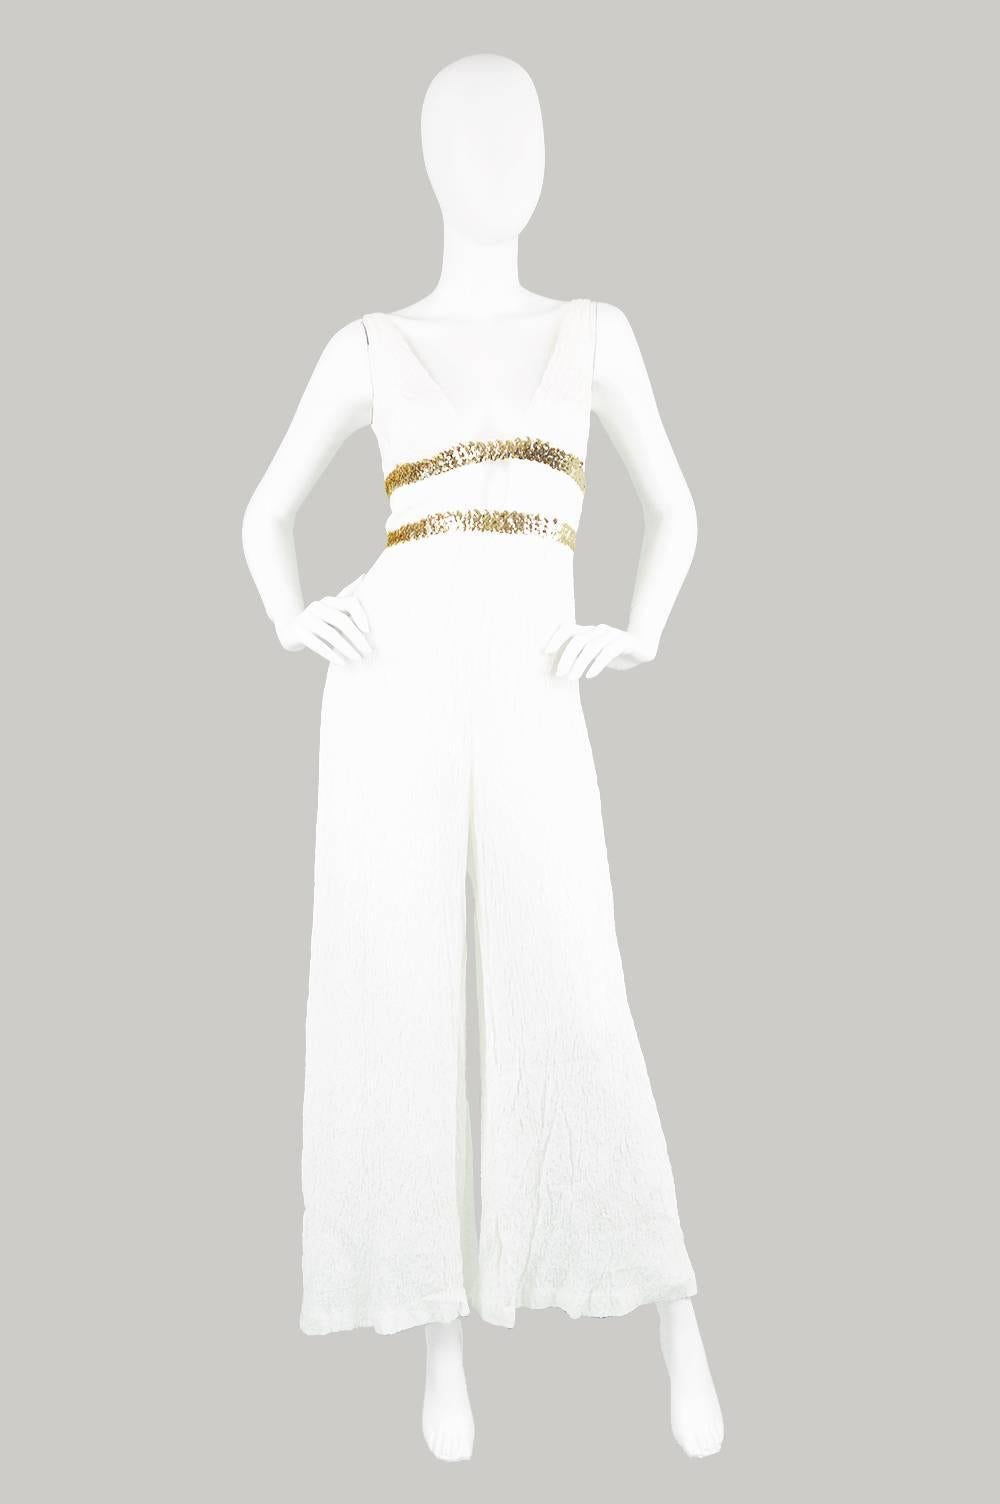 A stunning vintage jumpsuit from the 1970s, by highly collectible British label, Jean Varon, which was designed by John Bates who is renowned for his space age mod looks in the 60s and ethereal, Grecian bohemian gowns in the 70s. With it's wide,